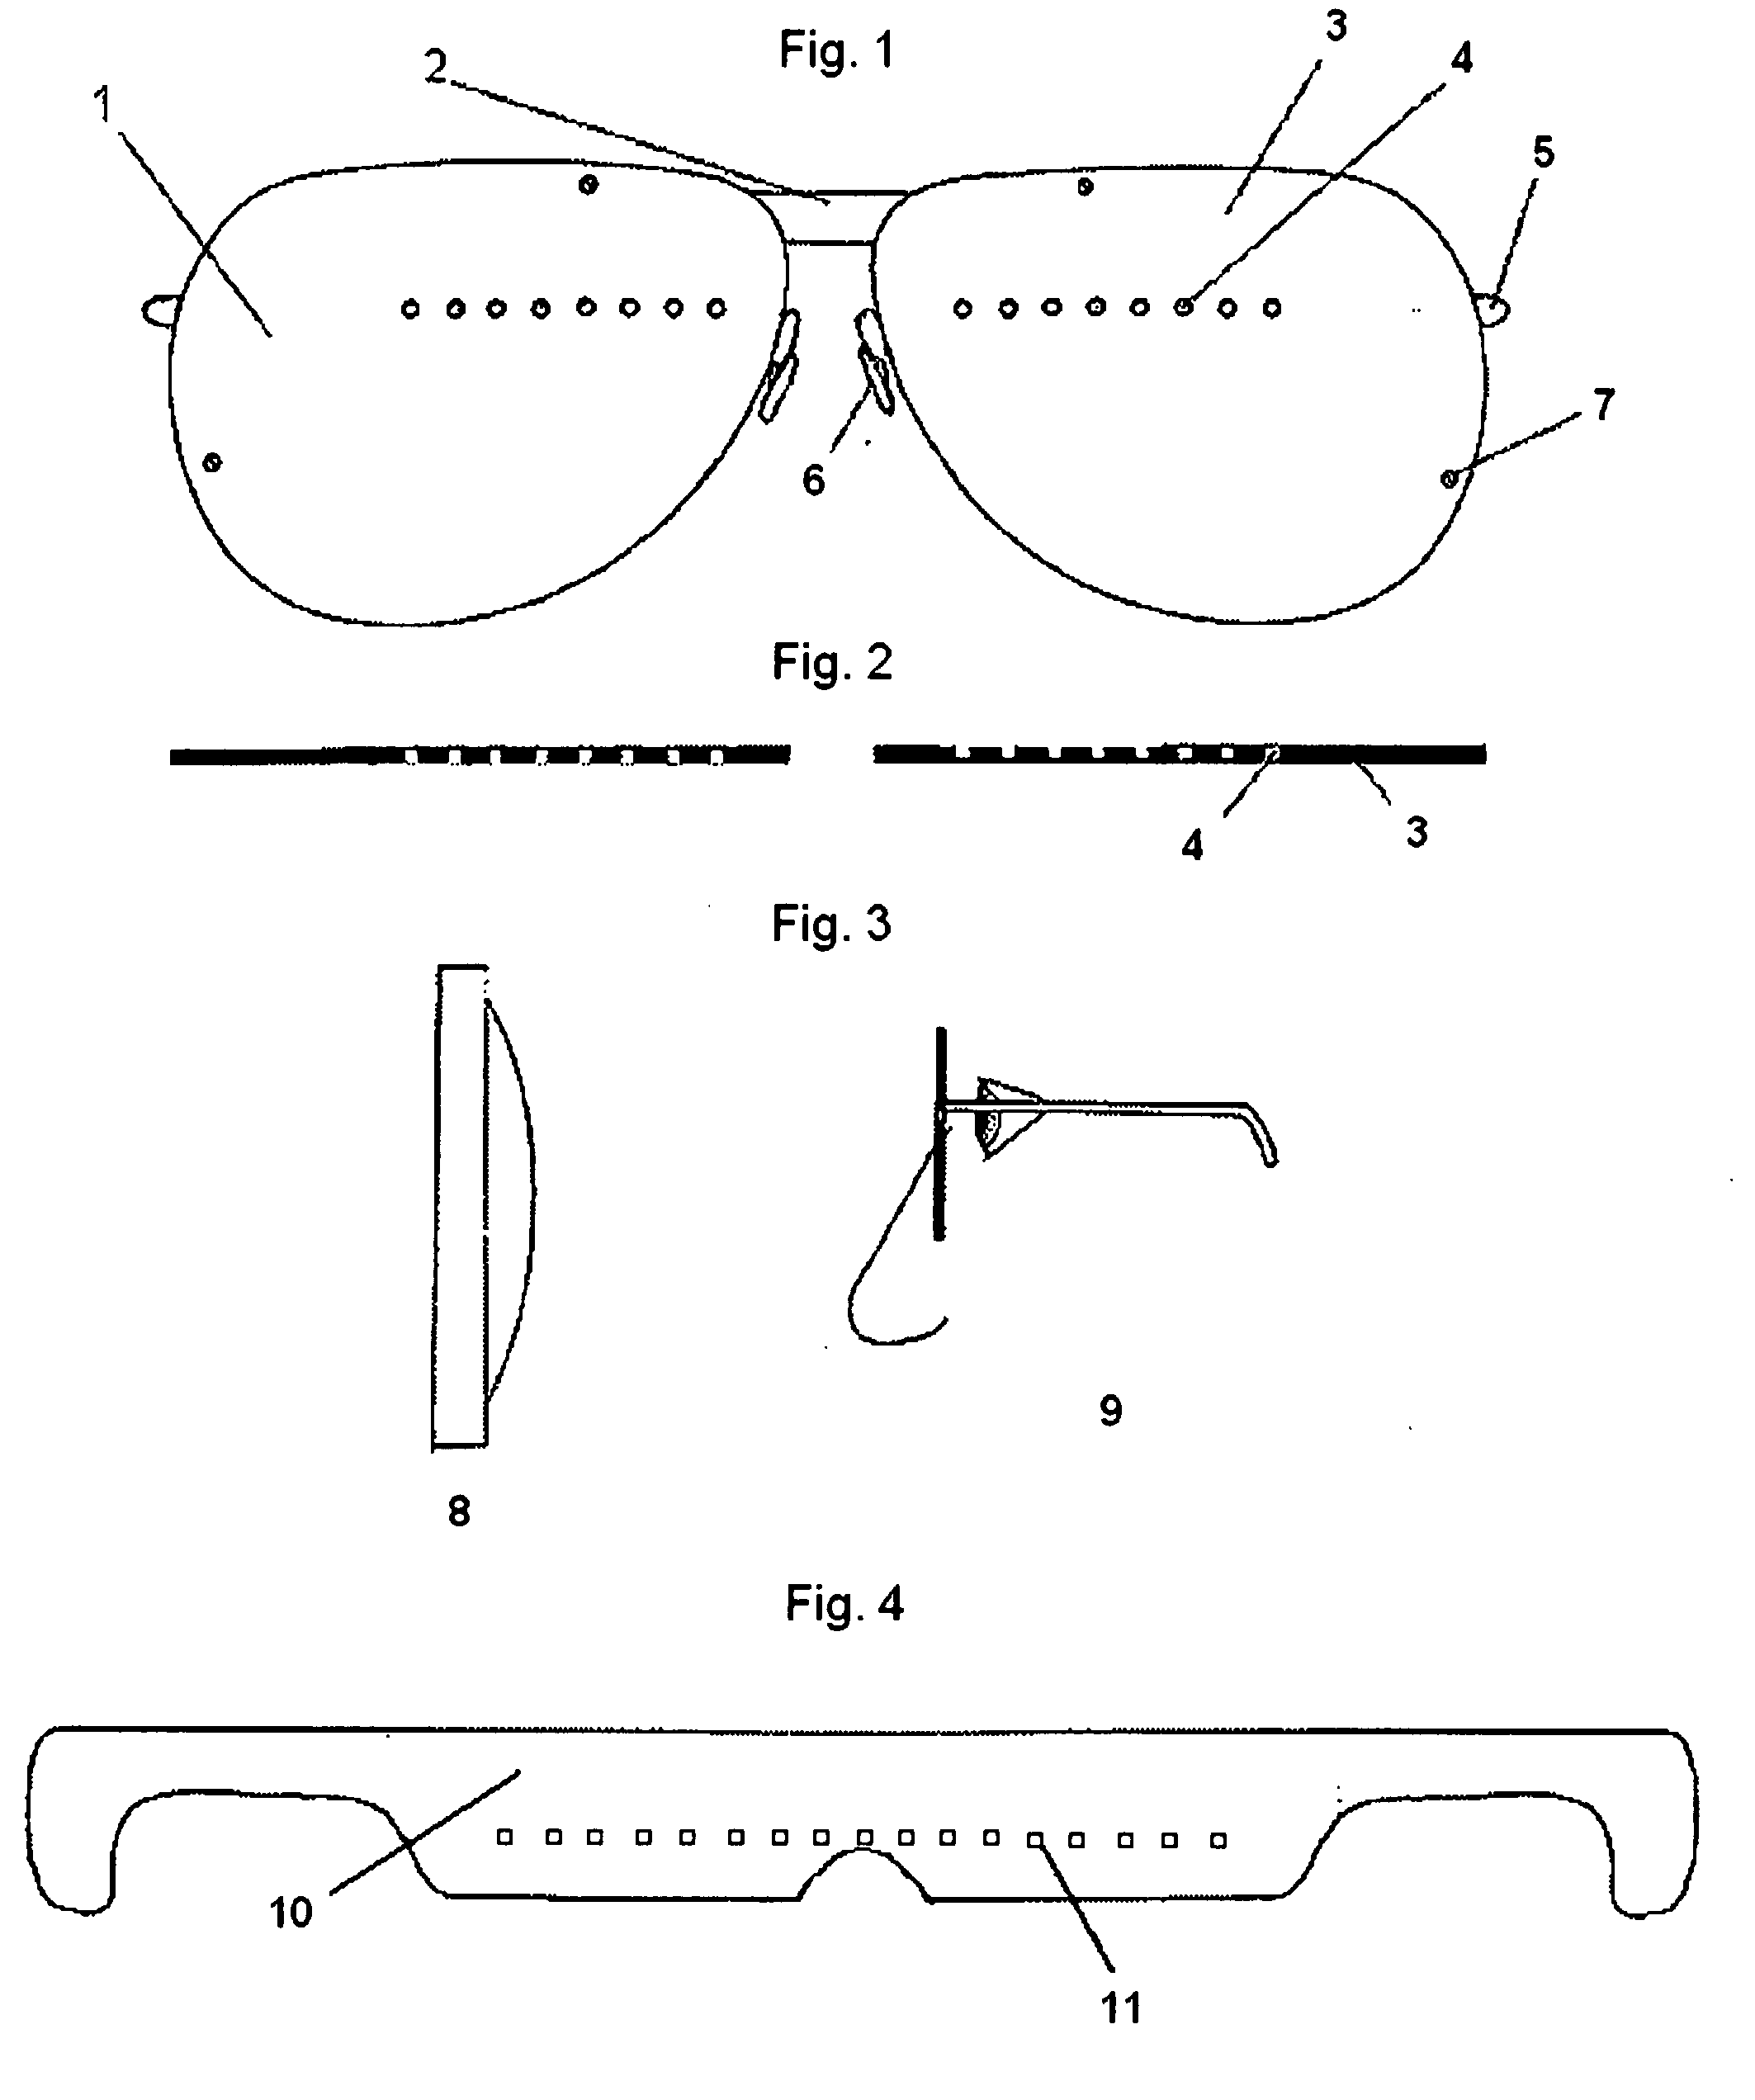 Apparatus for viewing two-dimensional images in 3-D